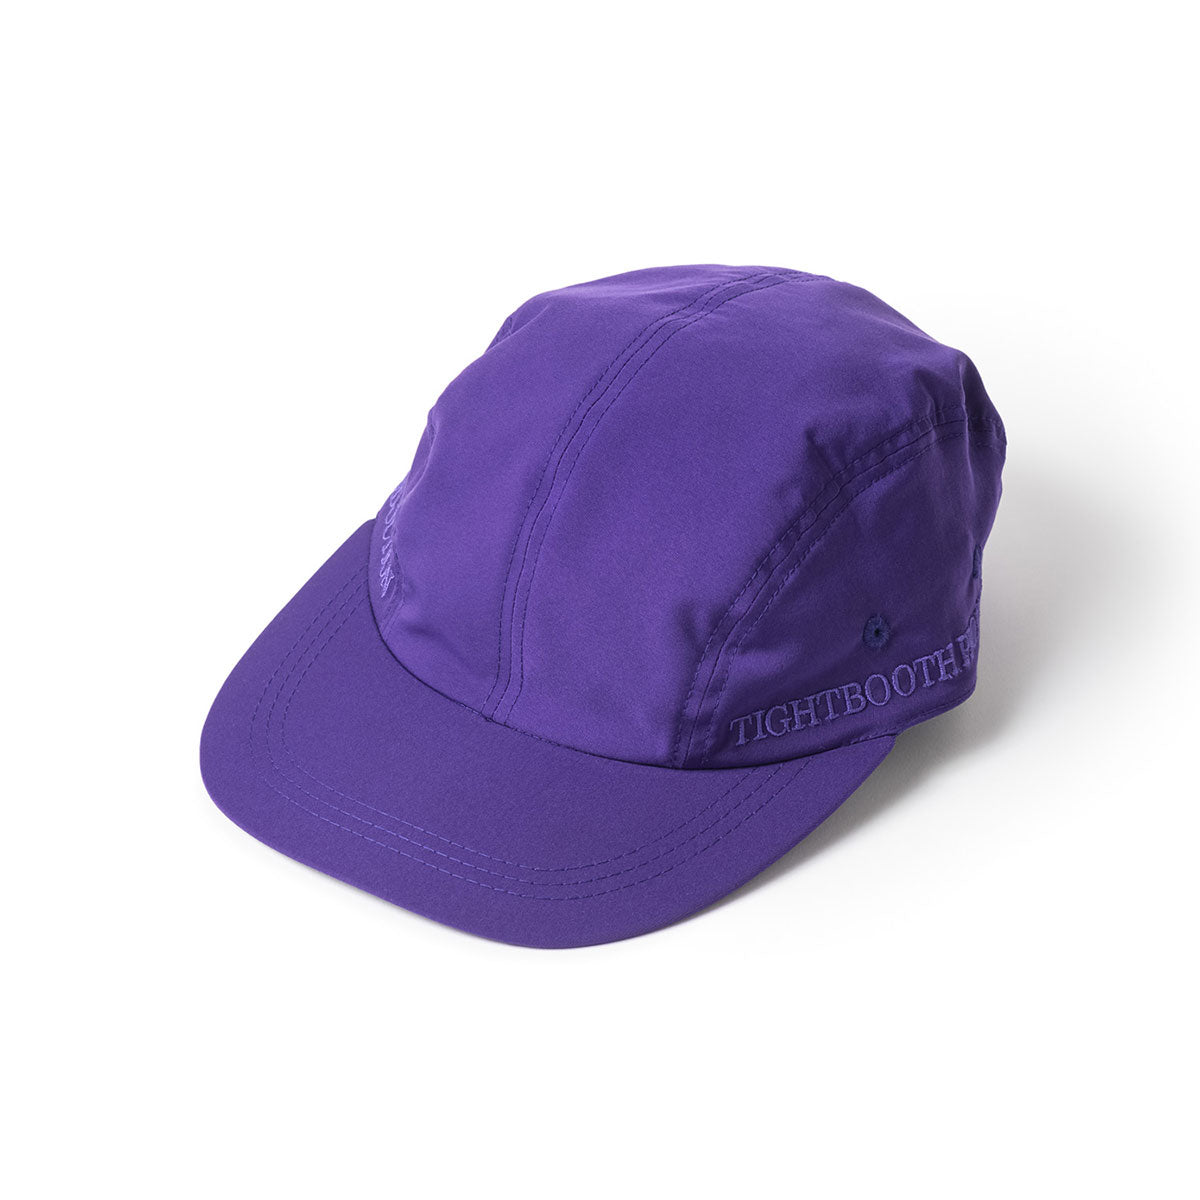 SIDE LOGO CAMP CAP - Why are you here?